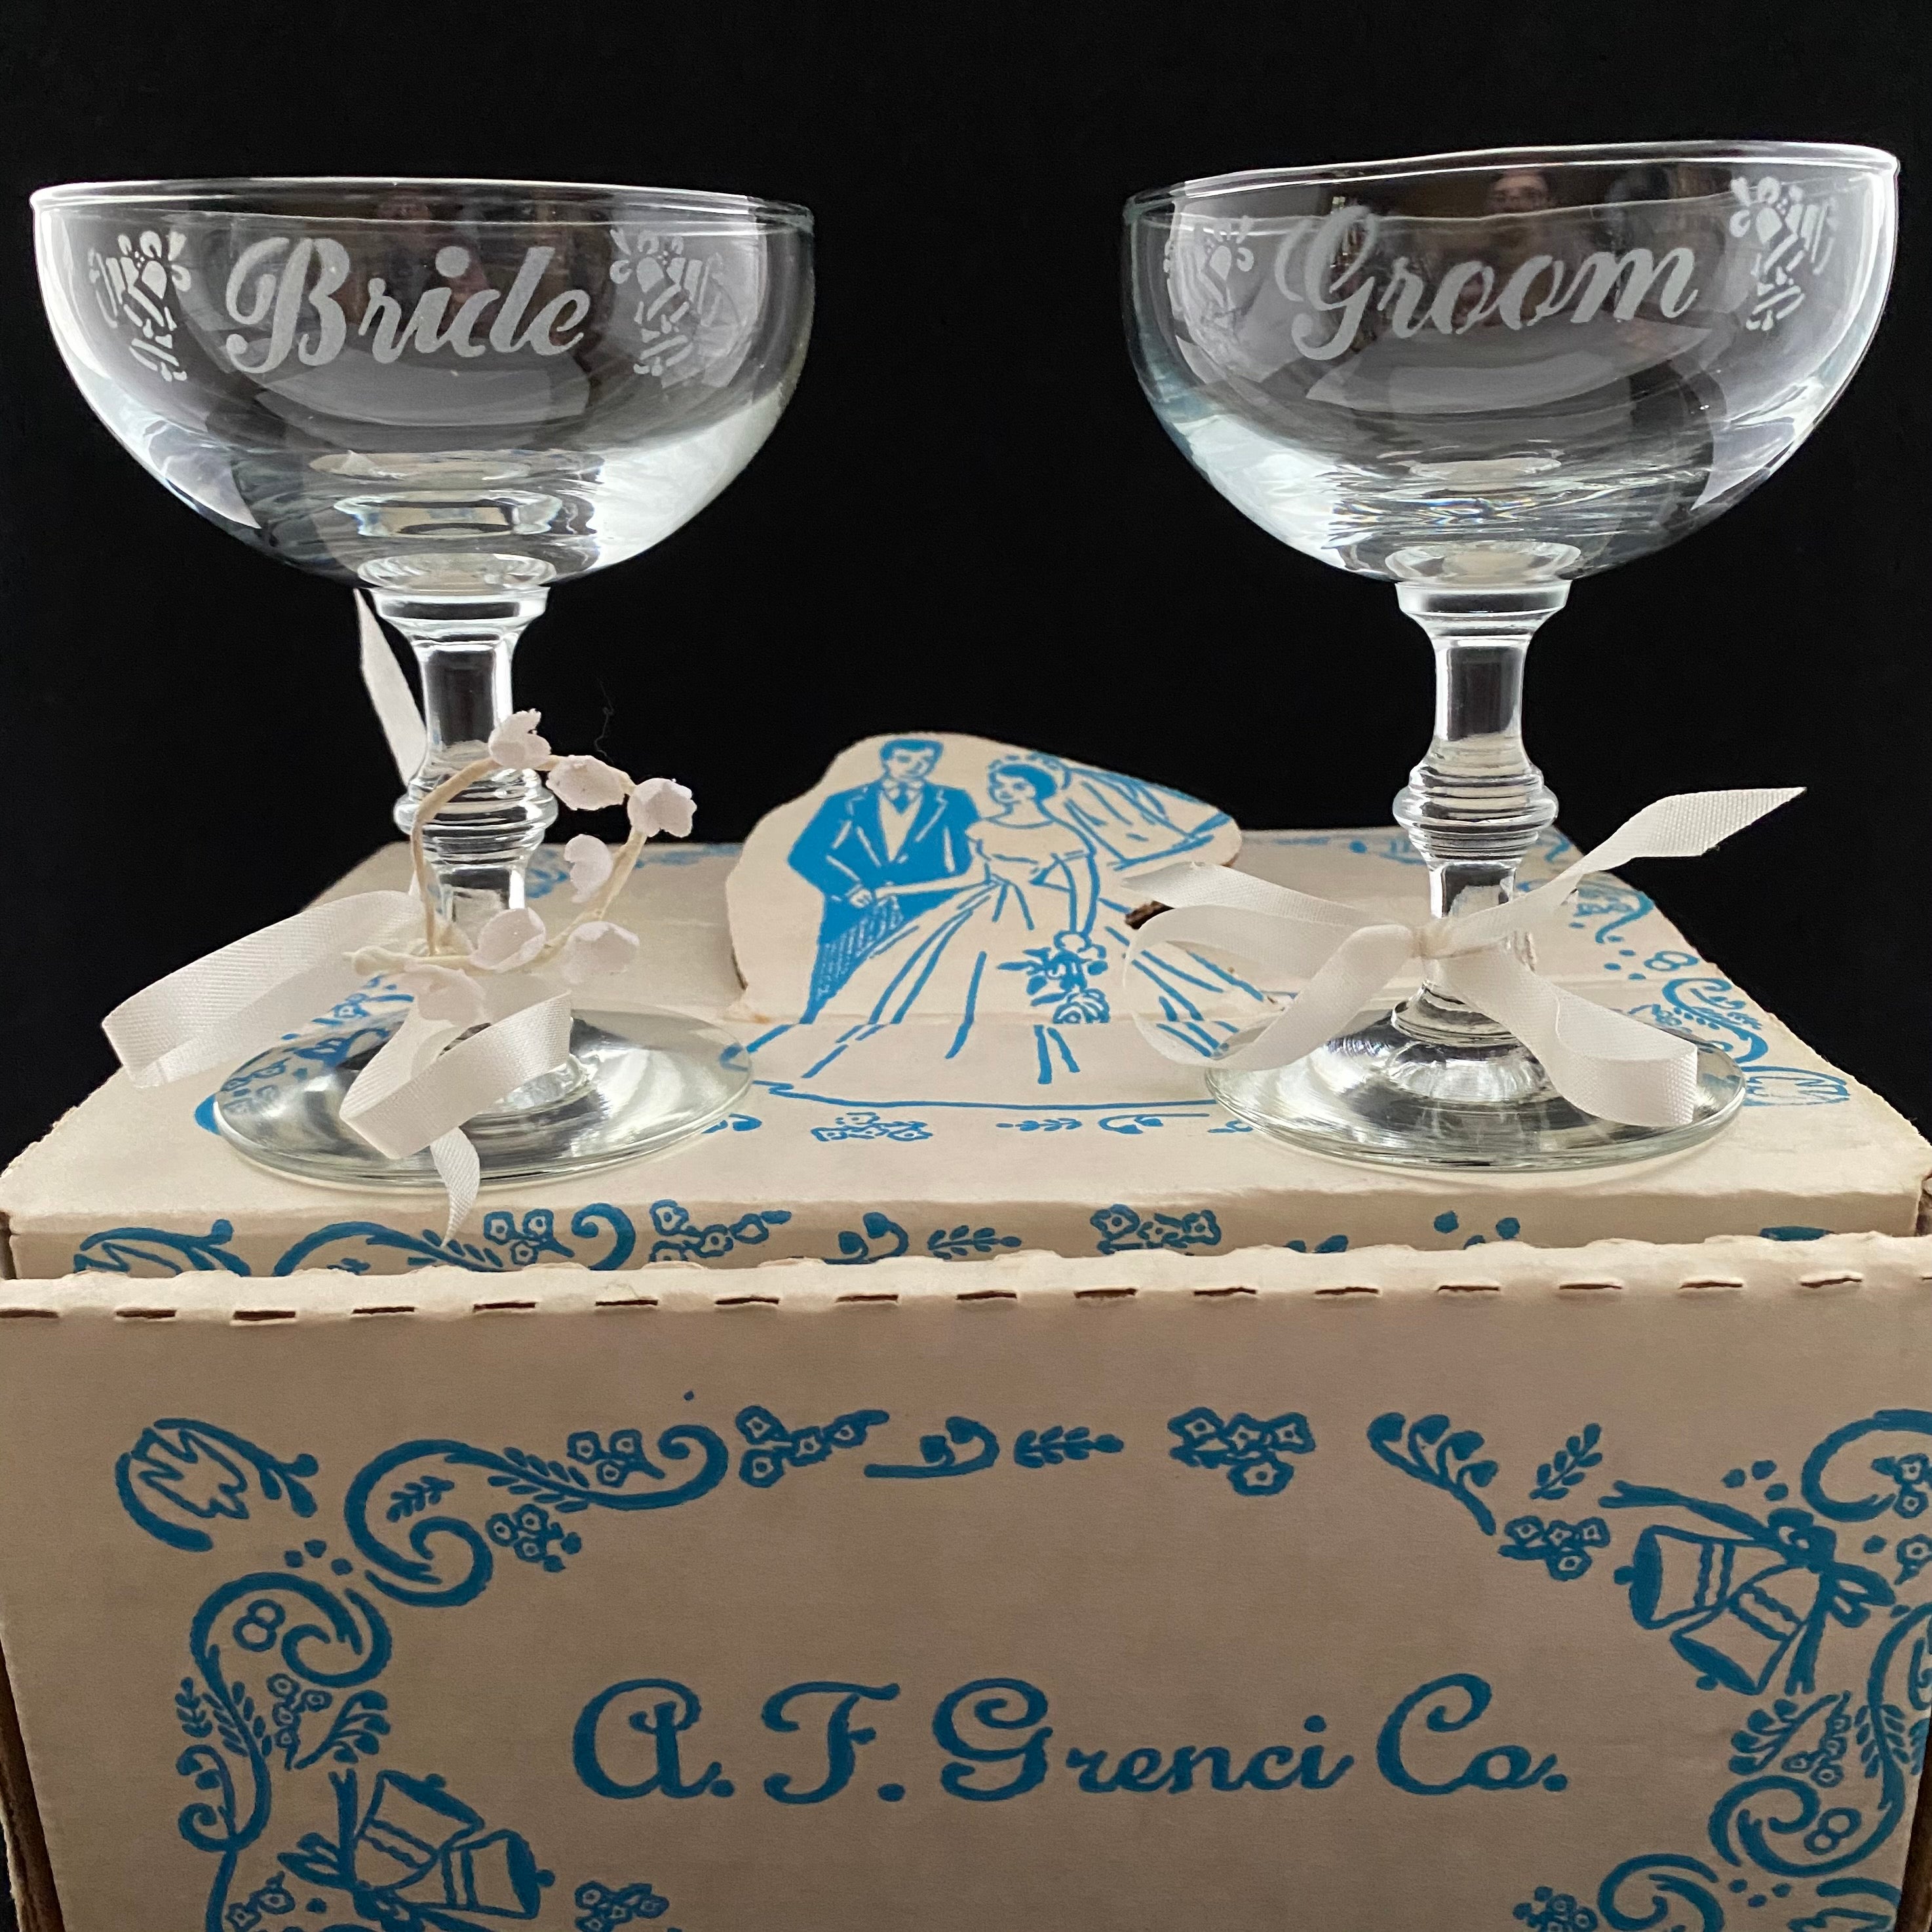 Bride and Groom Coupe Glasses Coupe Champagne Glasses Vintage Bride and Groom Champagne Glasses 1950's